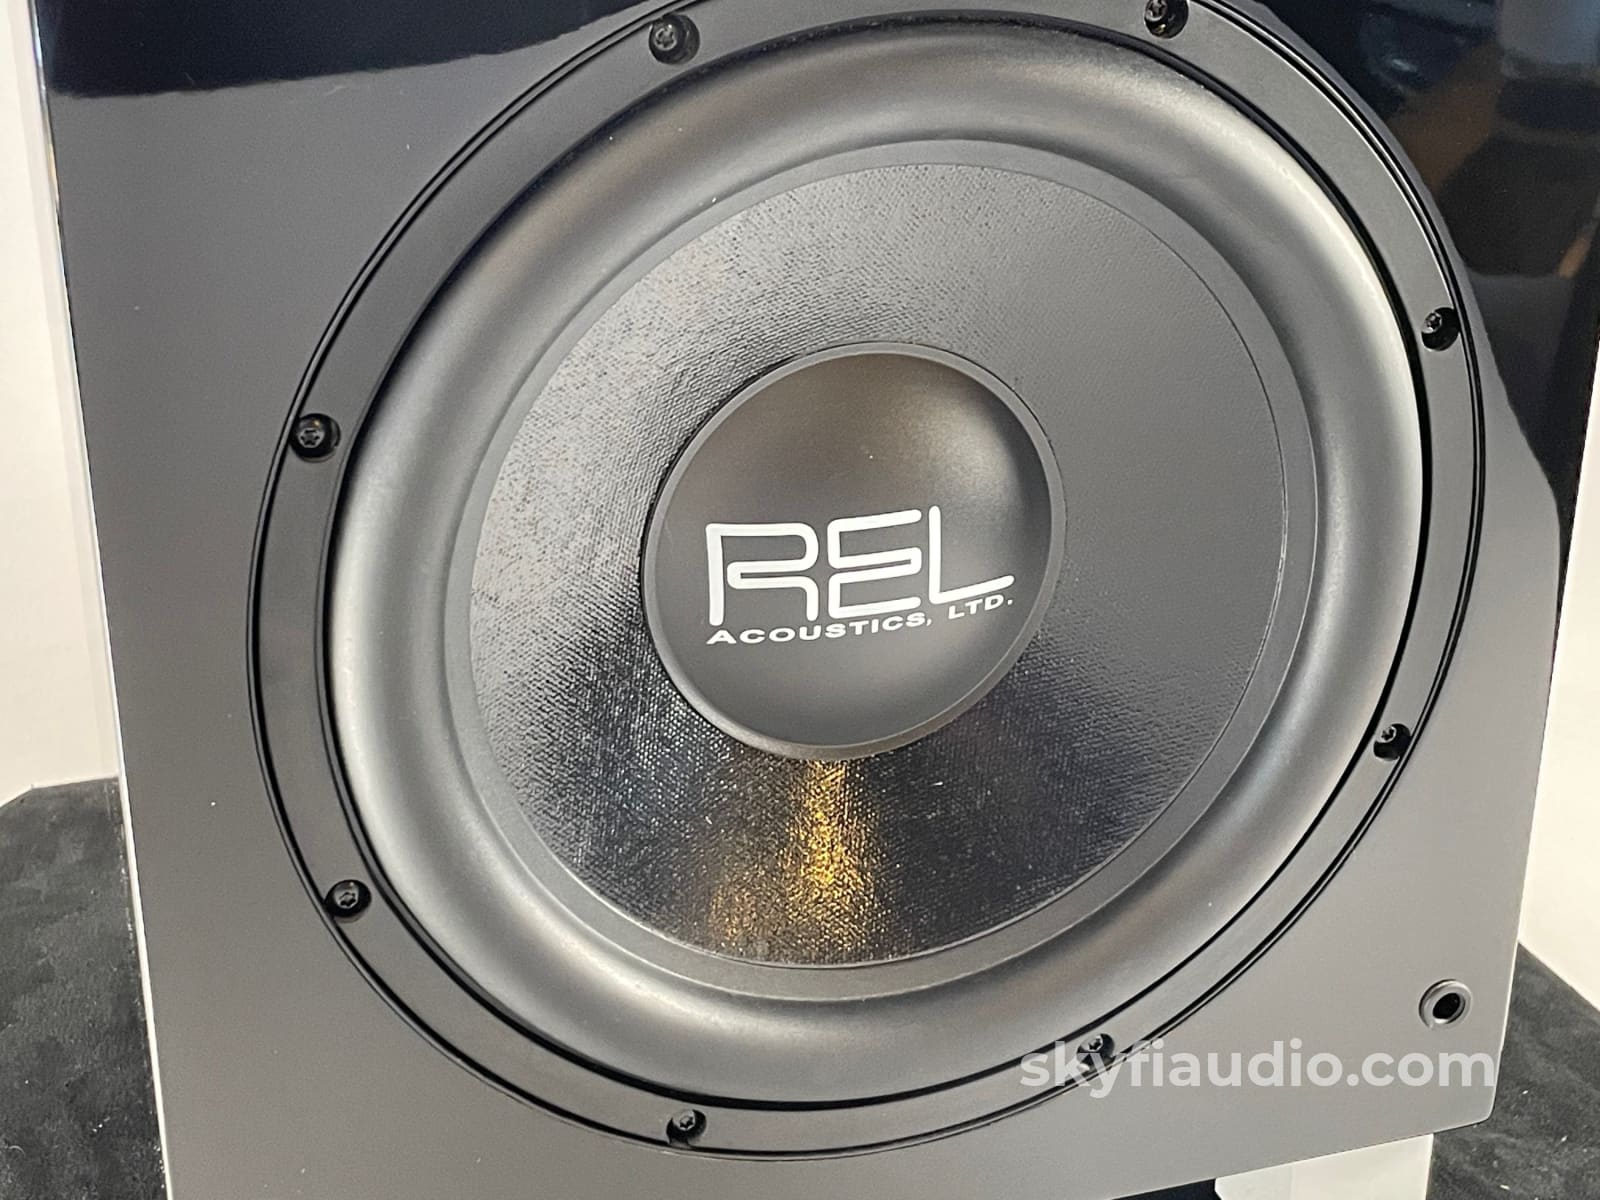 Rel Acoustics T7 Subwoofer - 200W Class A/B Amplifier With Dual Woofers Speakers